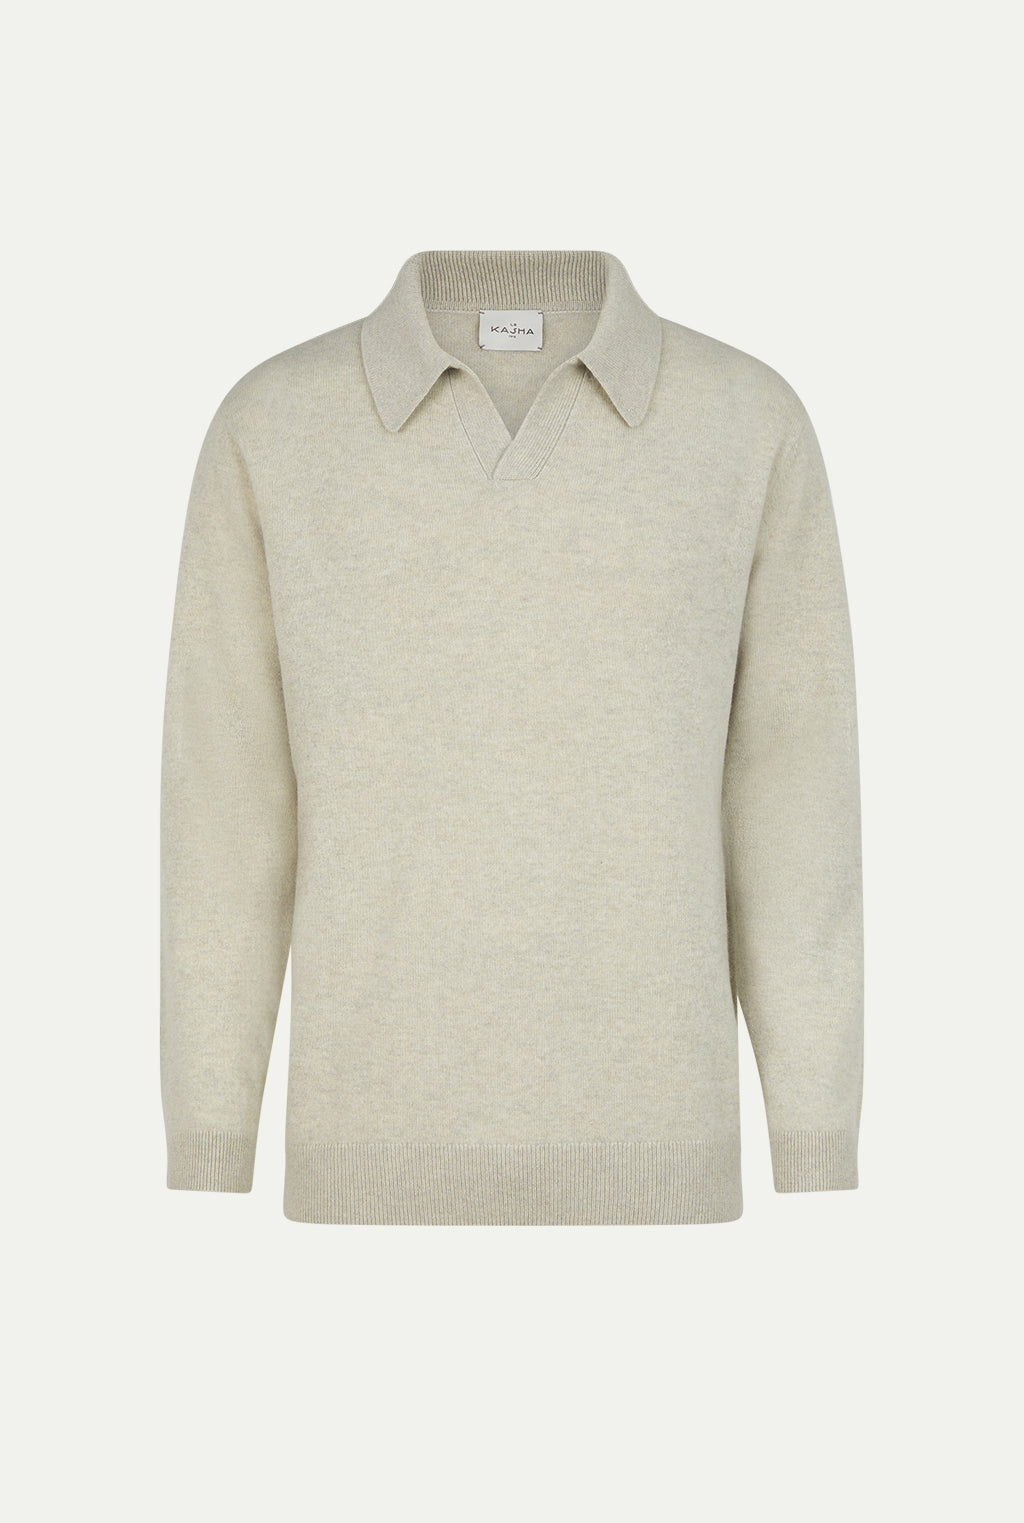 GIBSON cashmere sweater